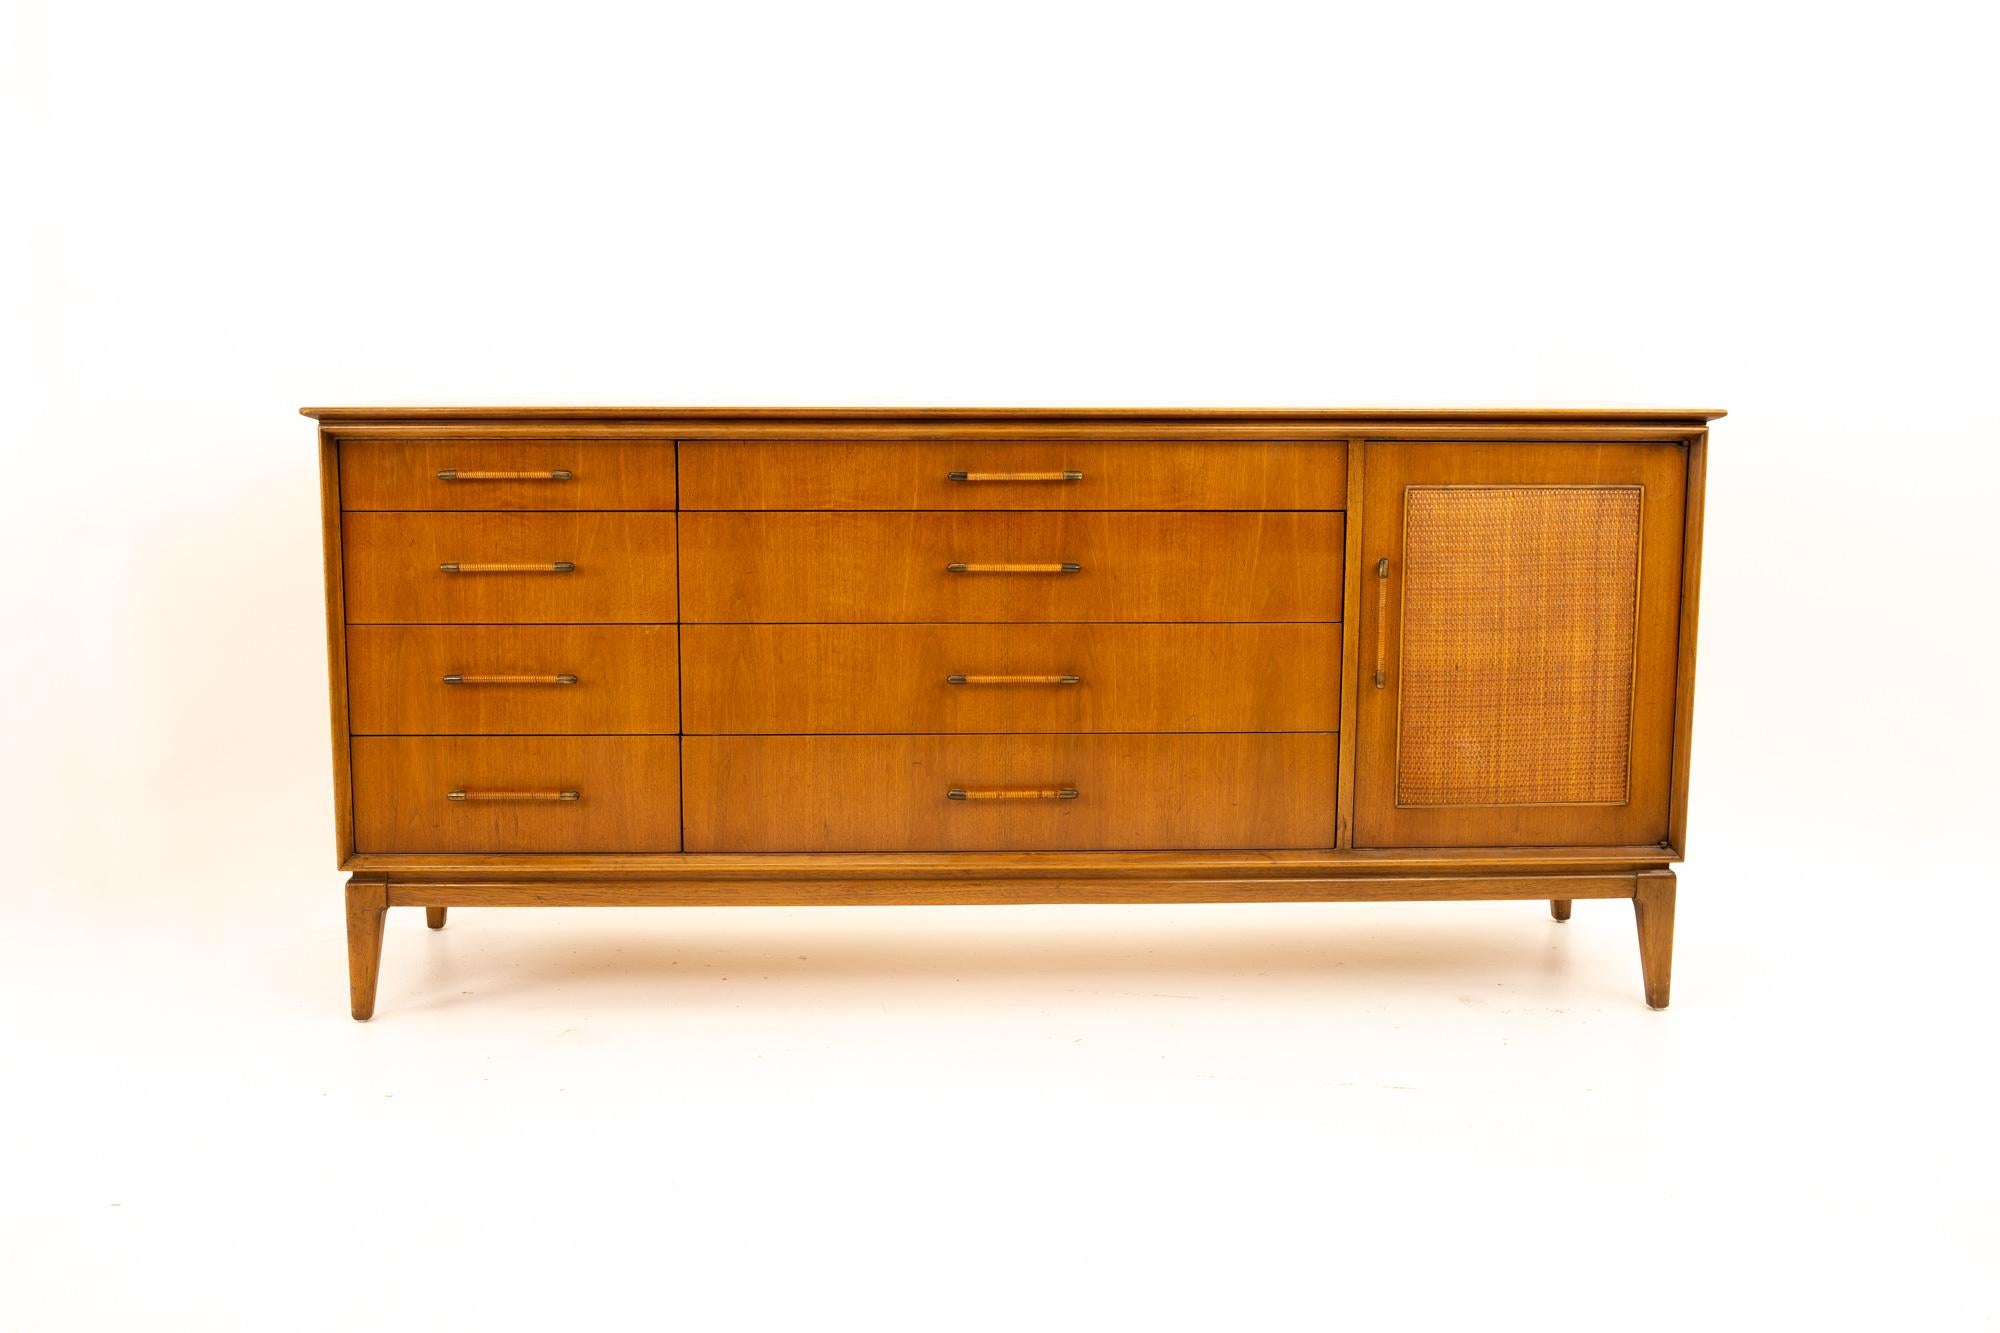 Paul McCobb style century furniture Mid Century walnut and cane 12-drawer lowboy dresser
Dresser measures: 72 wide x 19.5 deep x 32.5 high

All pieces of furniture can be had in what we call restored vintage condition. That means the piece is